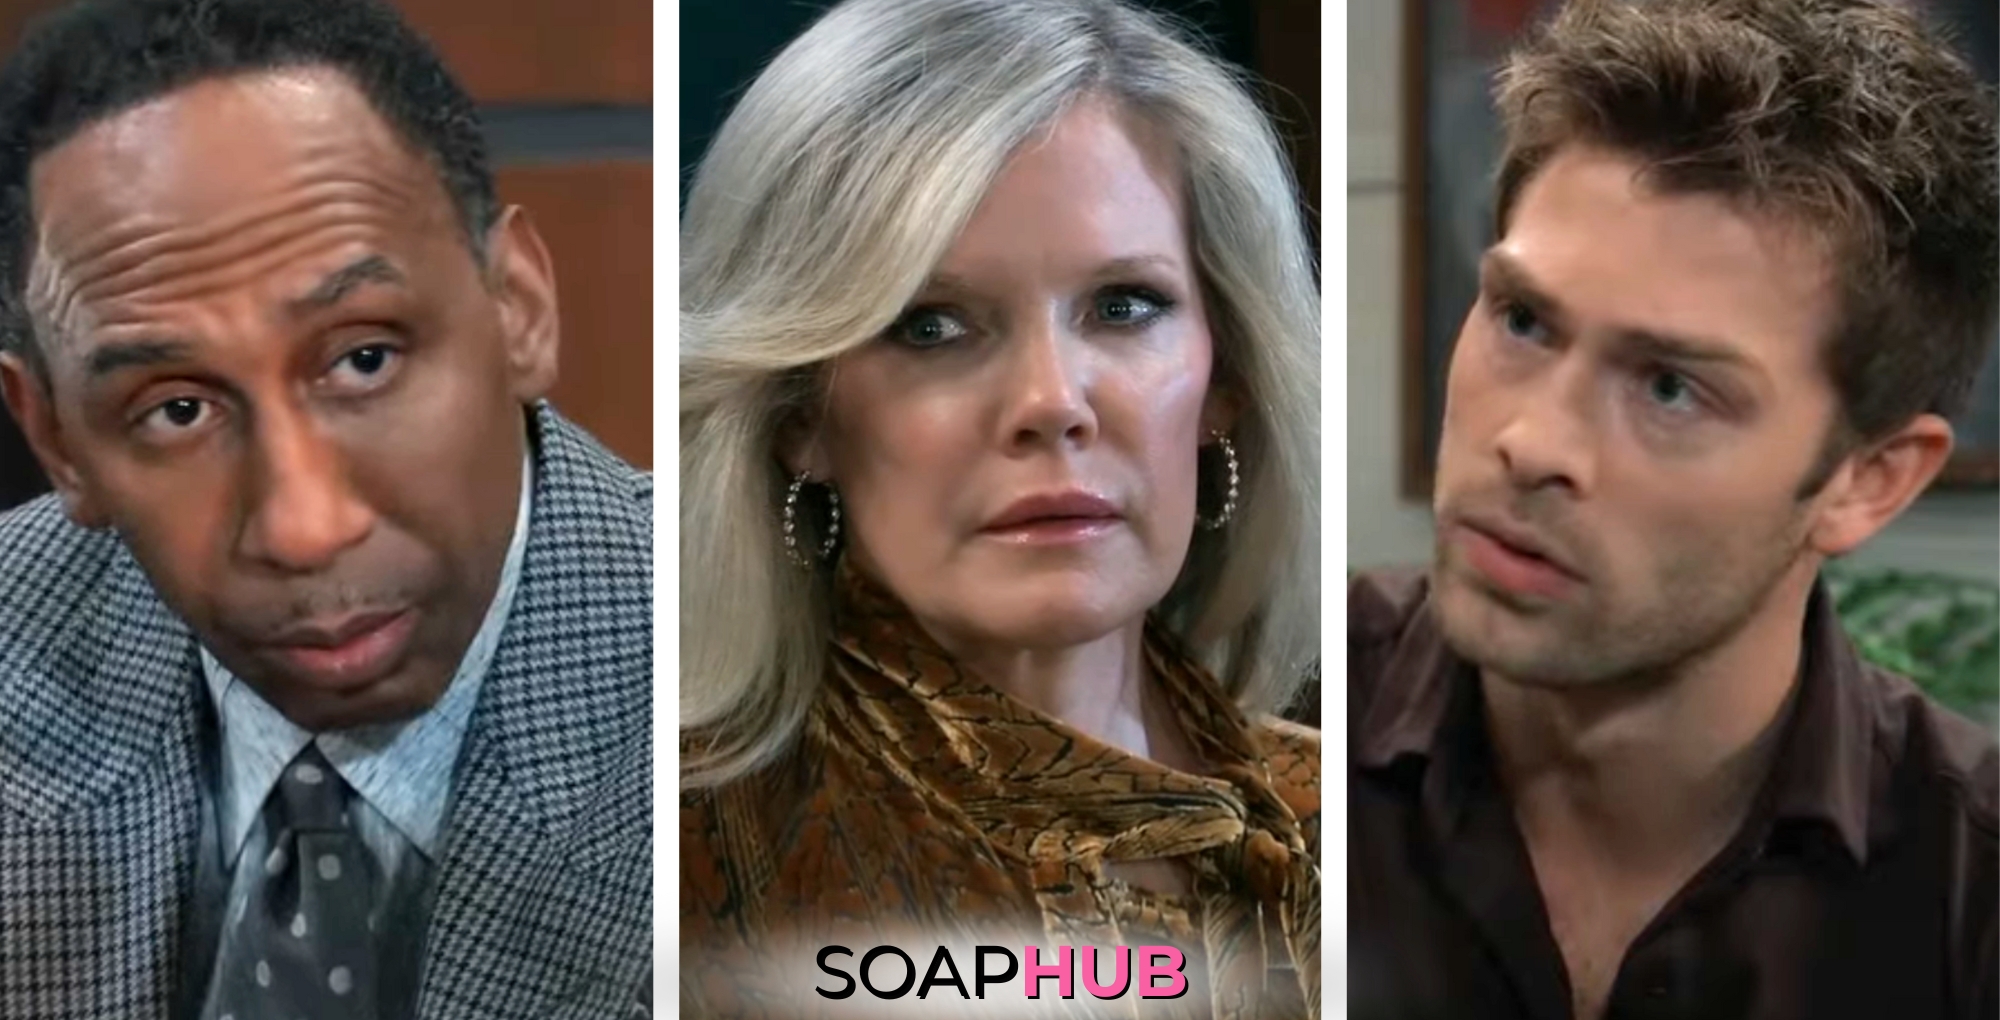 GH Spoilers Weekly Update: Big Reveals And Romances